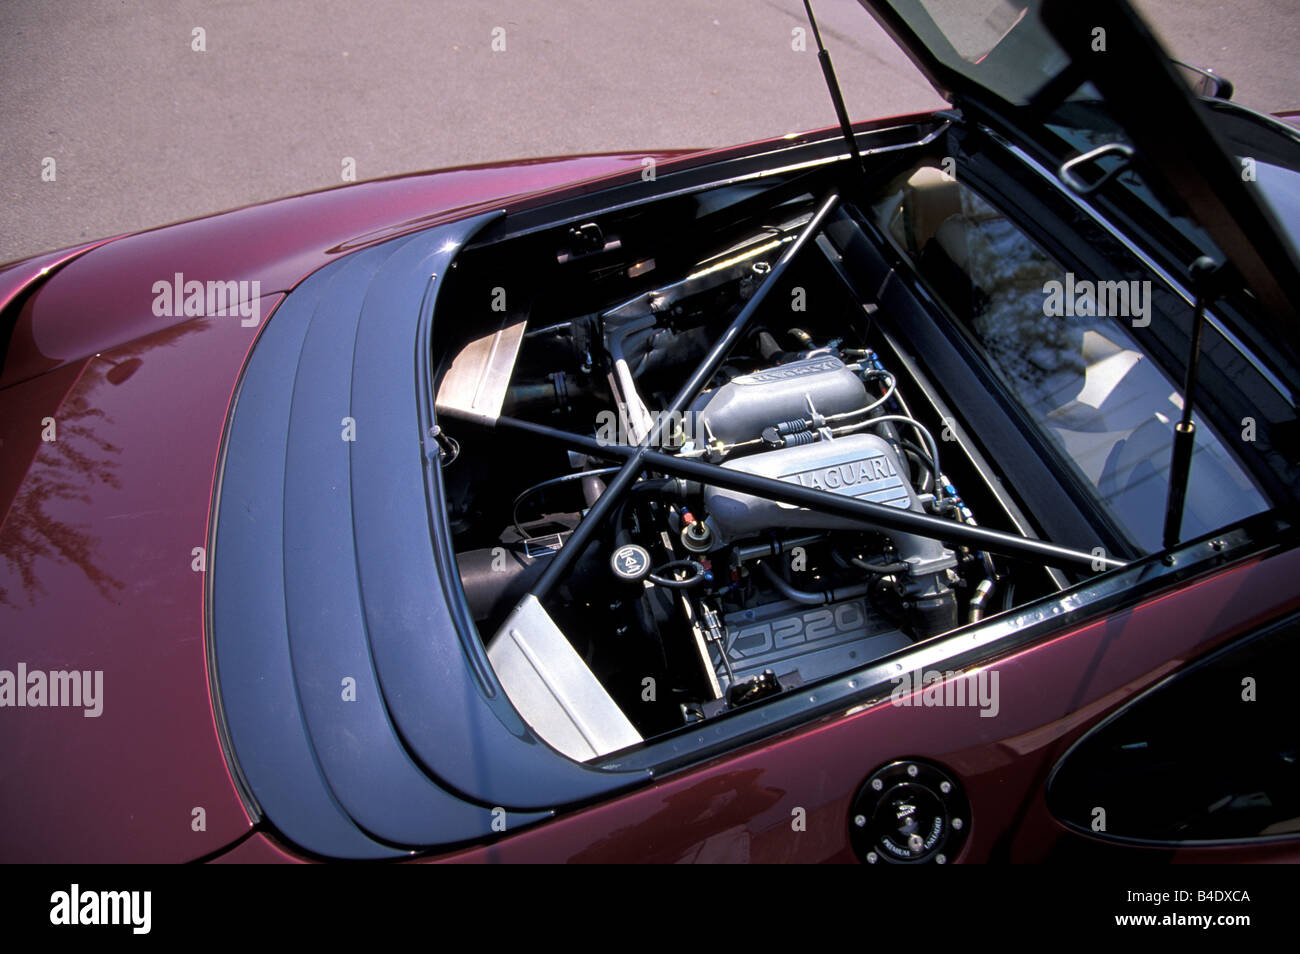 Car, Jaguar XJ 220, model year 1994, wine-red-metallic, coupe/Coupe, roadster, view in engine compartment, technique/accessory, Stock Photo